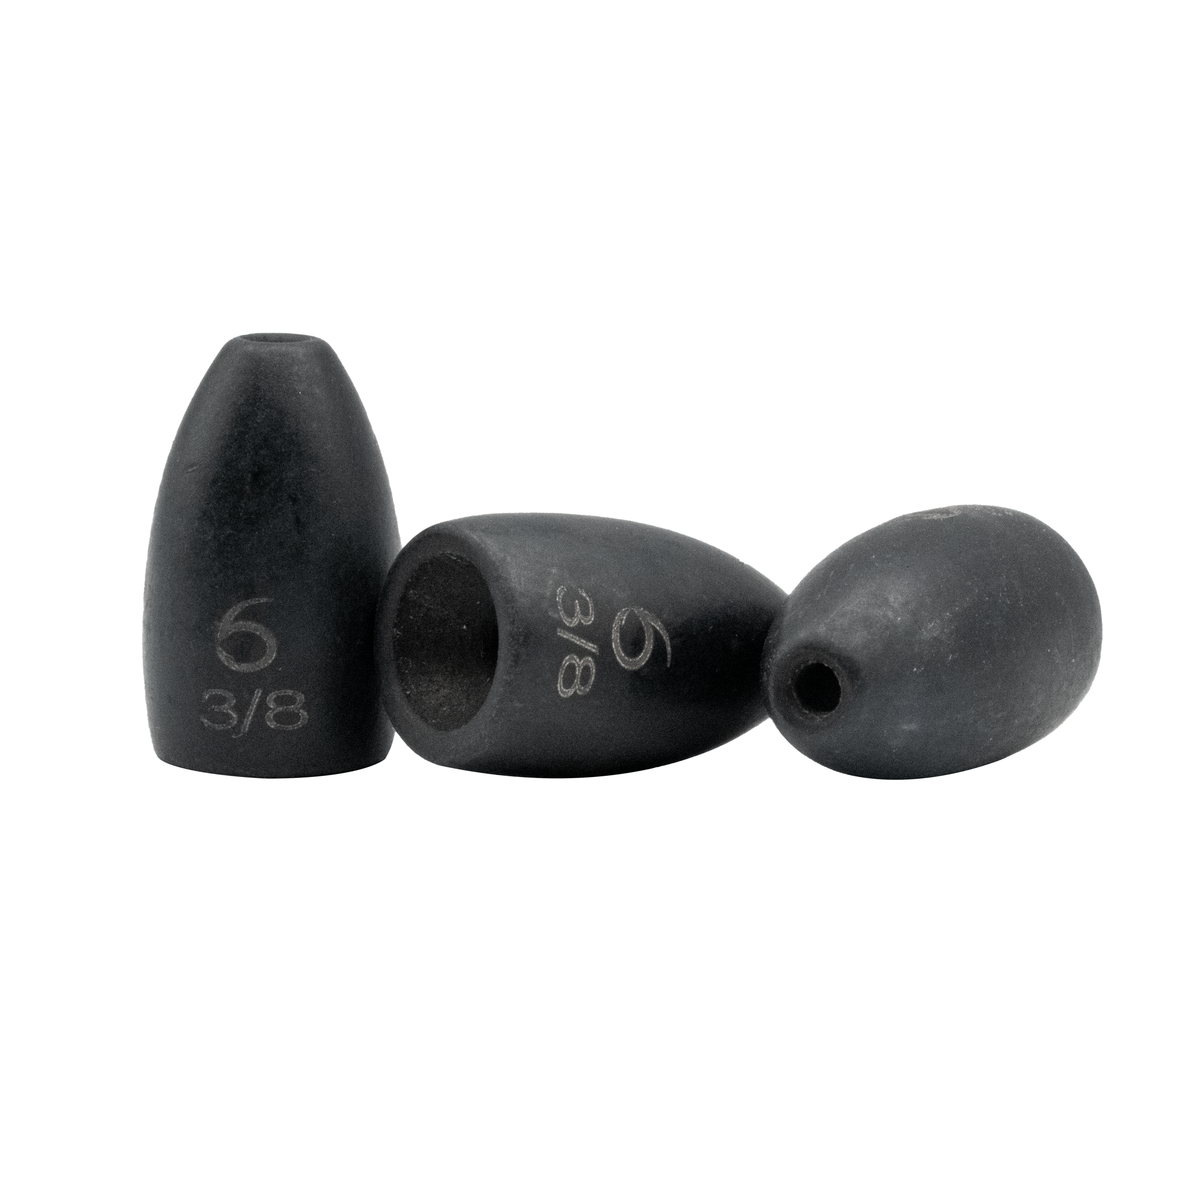  6th Sense Fishing peg-x Weight Stopper – Silicone Stoppers,  Black : Sports & Outdoors